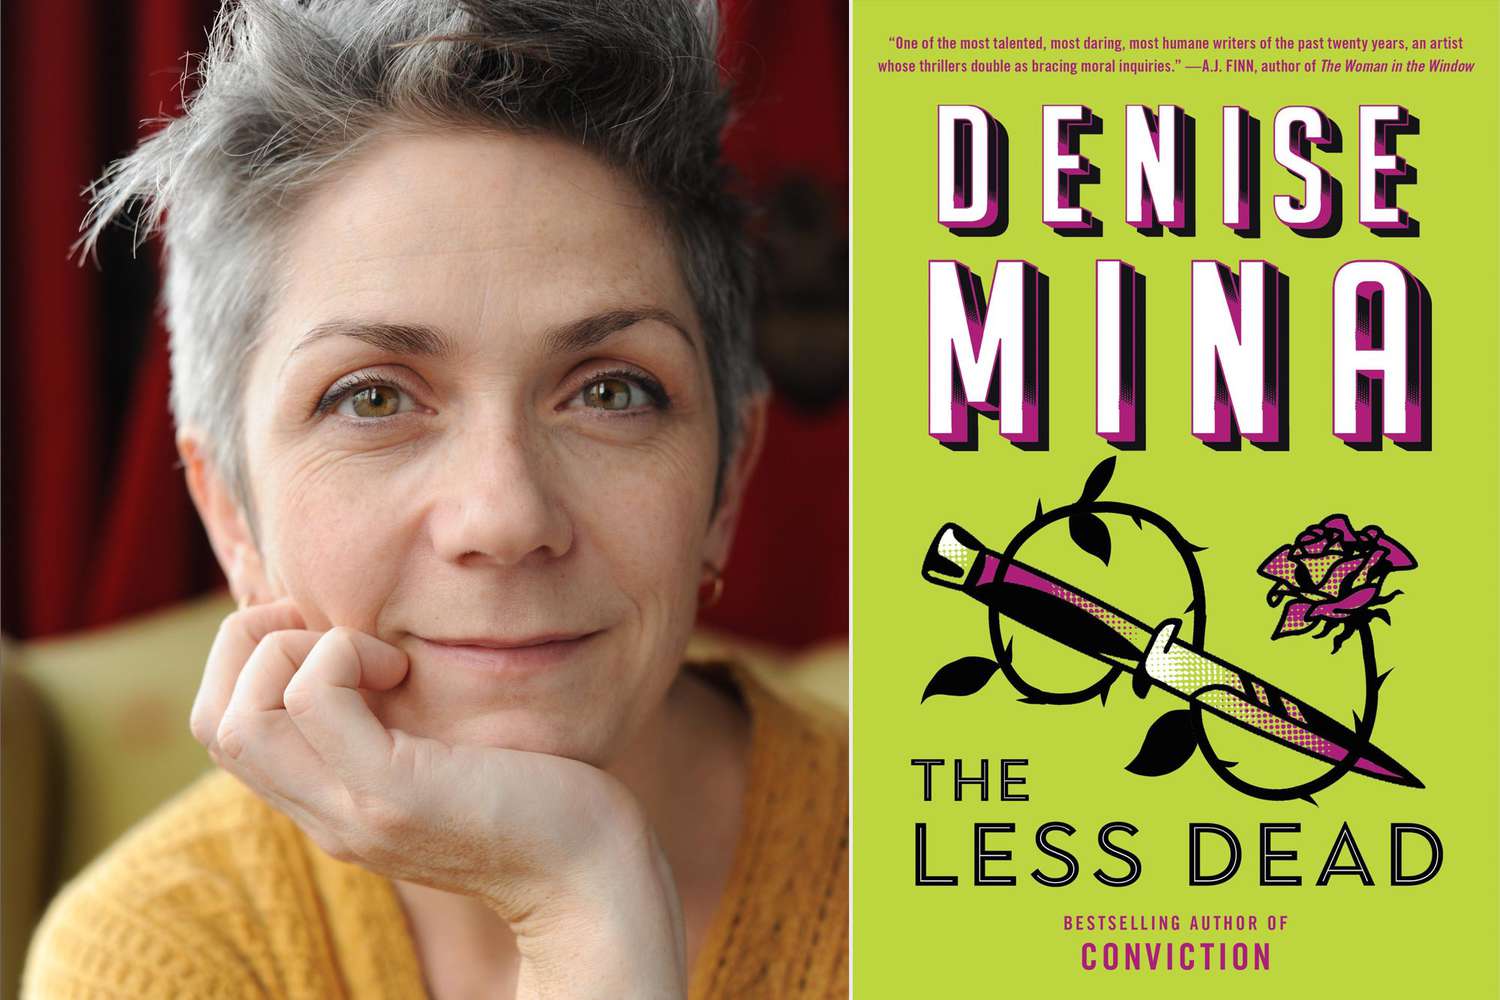 The Less Dead by Denise Mina